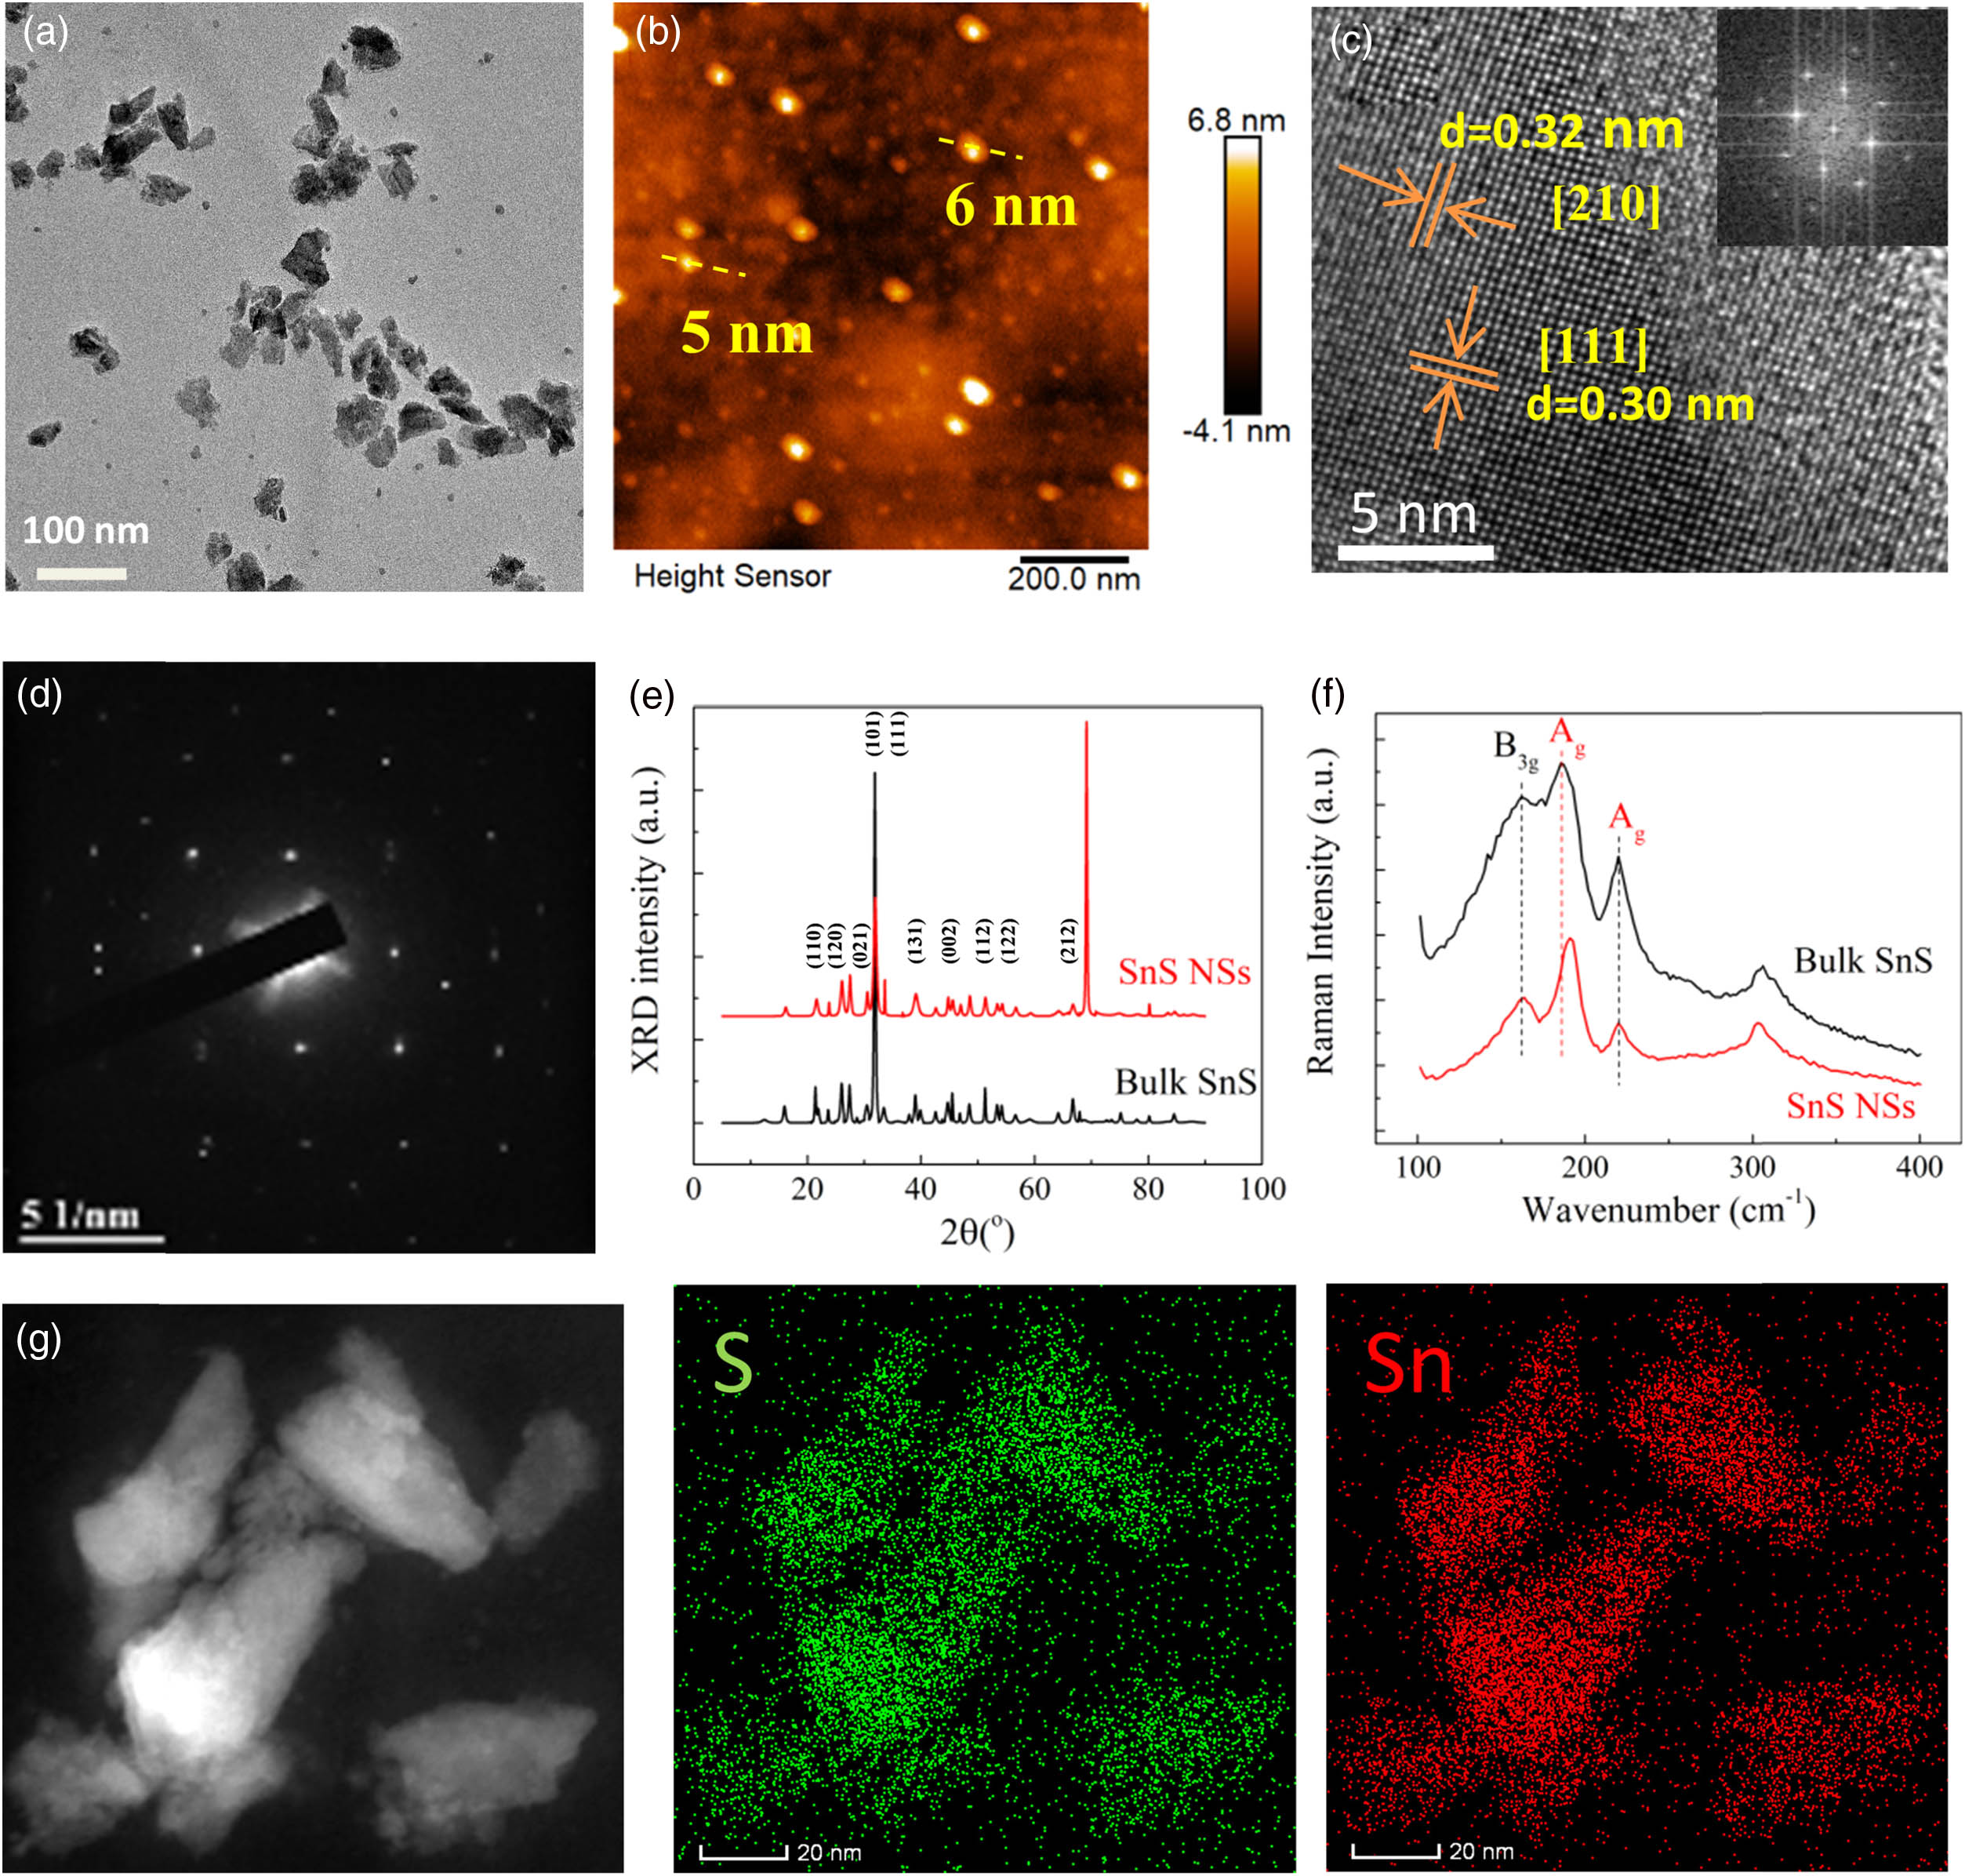 Typical characterizations of the SnS NSs. (a) TEM image; (b) AFM image; (c) crystal lattice shown by HRTEM image and corresponding FFT; (d) crystalline features shown by SAED; (e) XRD pattern; (f) Raman spectra of bulk SnS and exfoliated SnS NSs; (g) element distribution mapping via STEM.